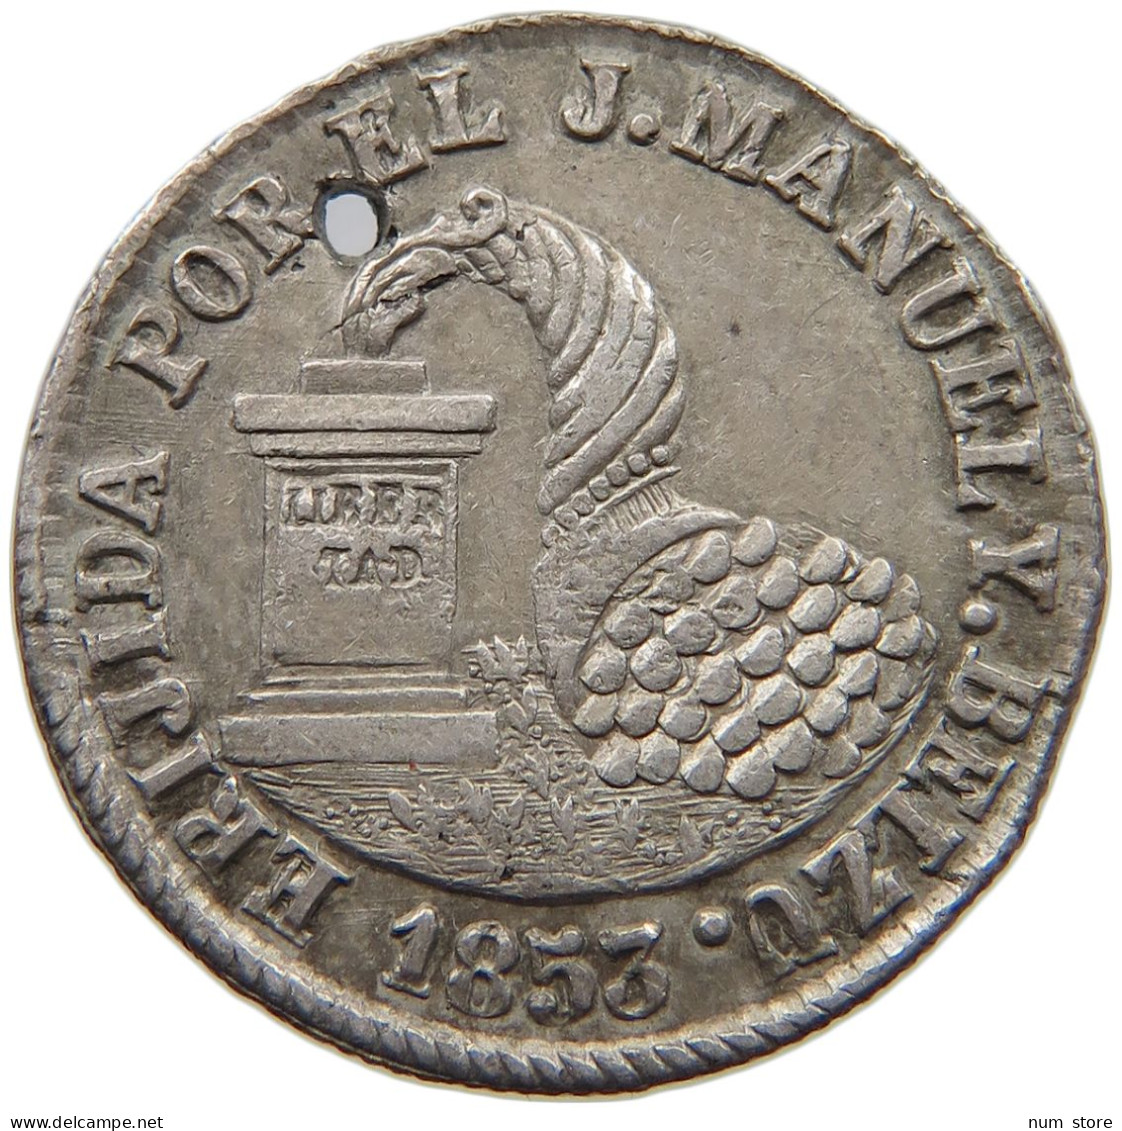 BOLIVIA 2 SOLES 1853 PROCLAMATION MEDAL #t135 0289 - Bolivie